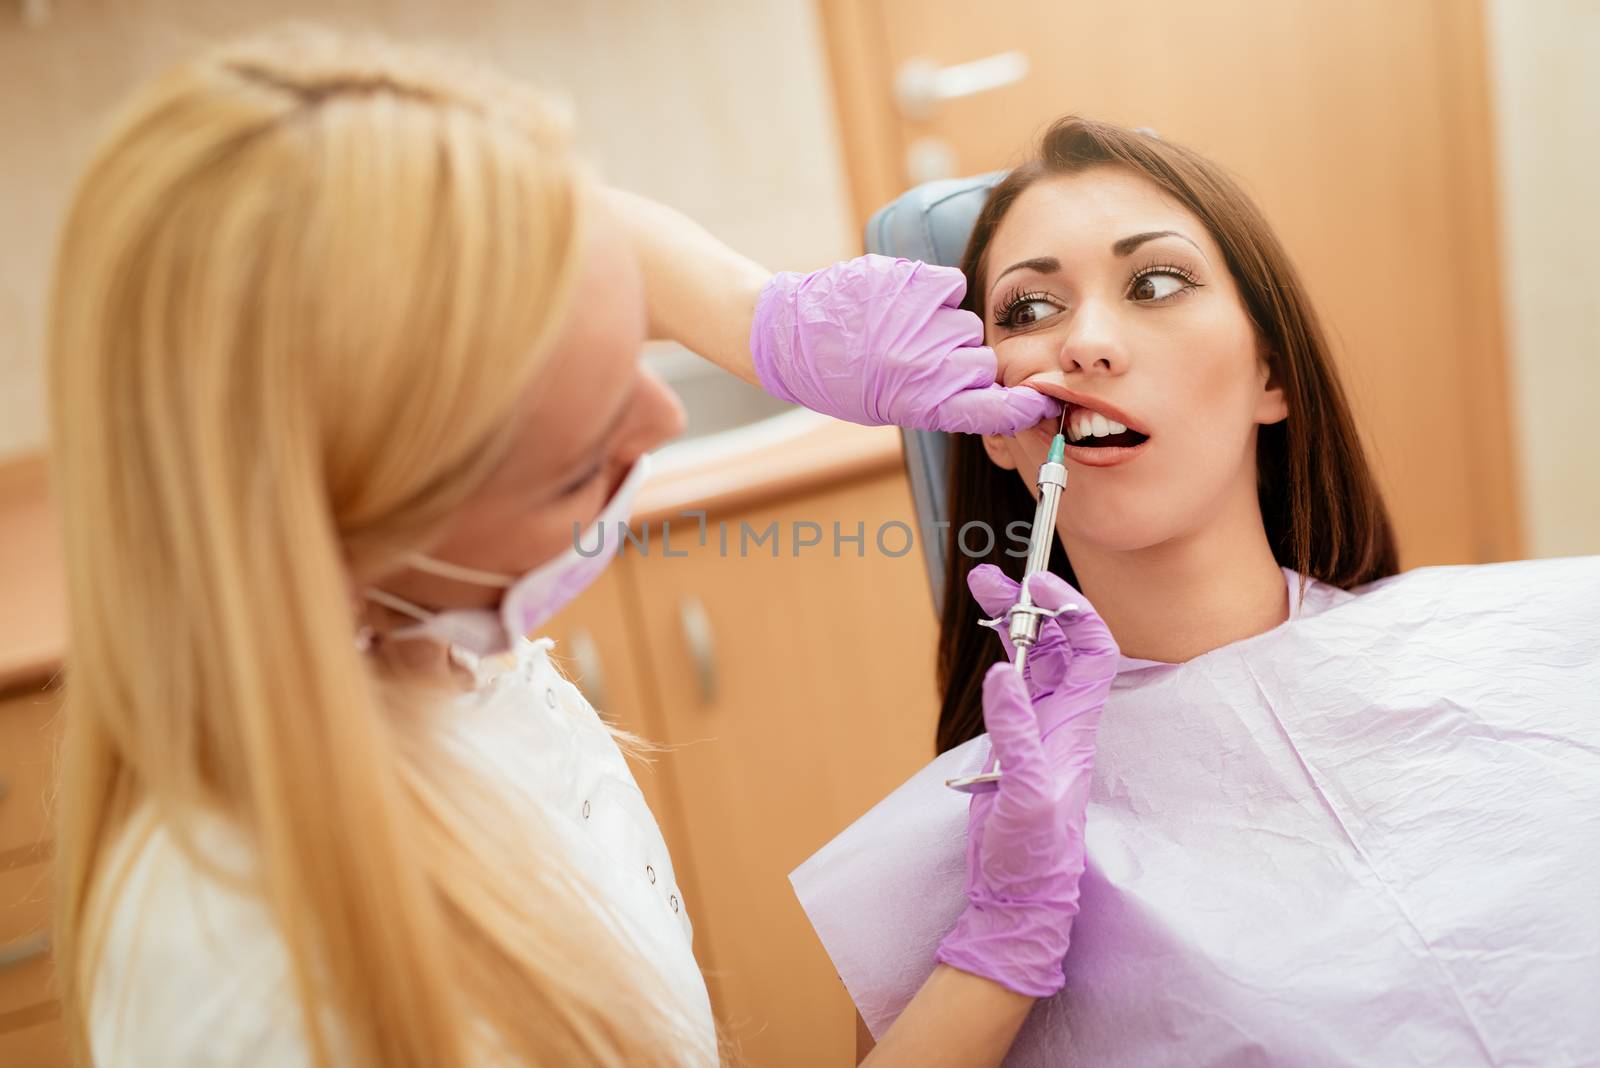 Dentist giving an injection of anesthesia to the female patient before dental treatment. Selective focus.